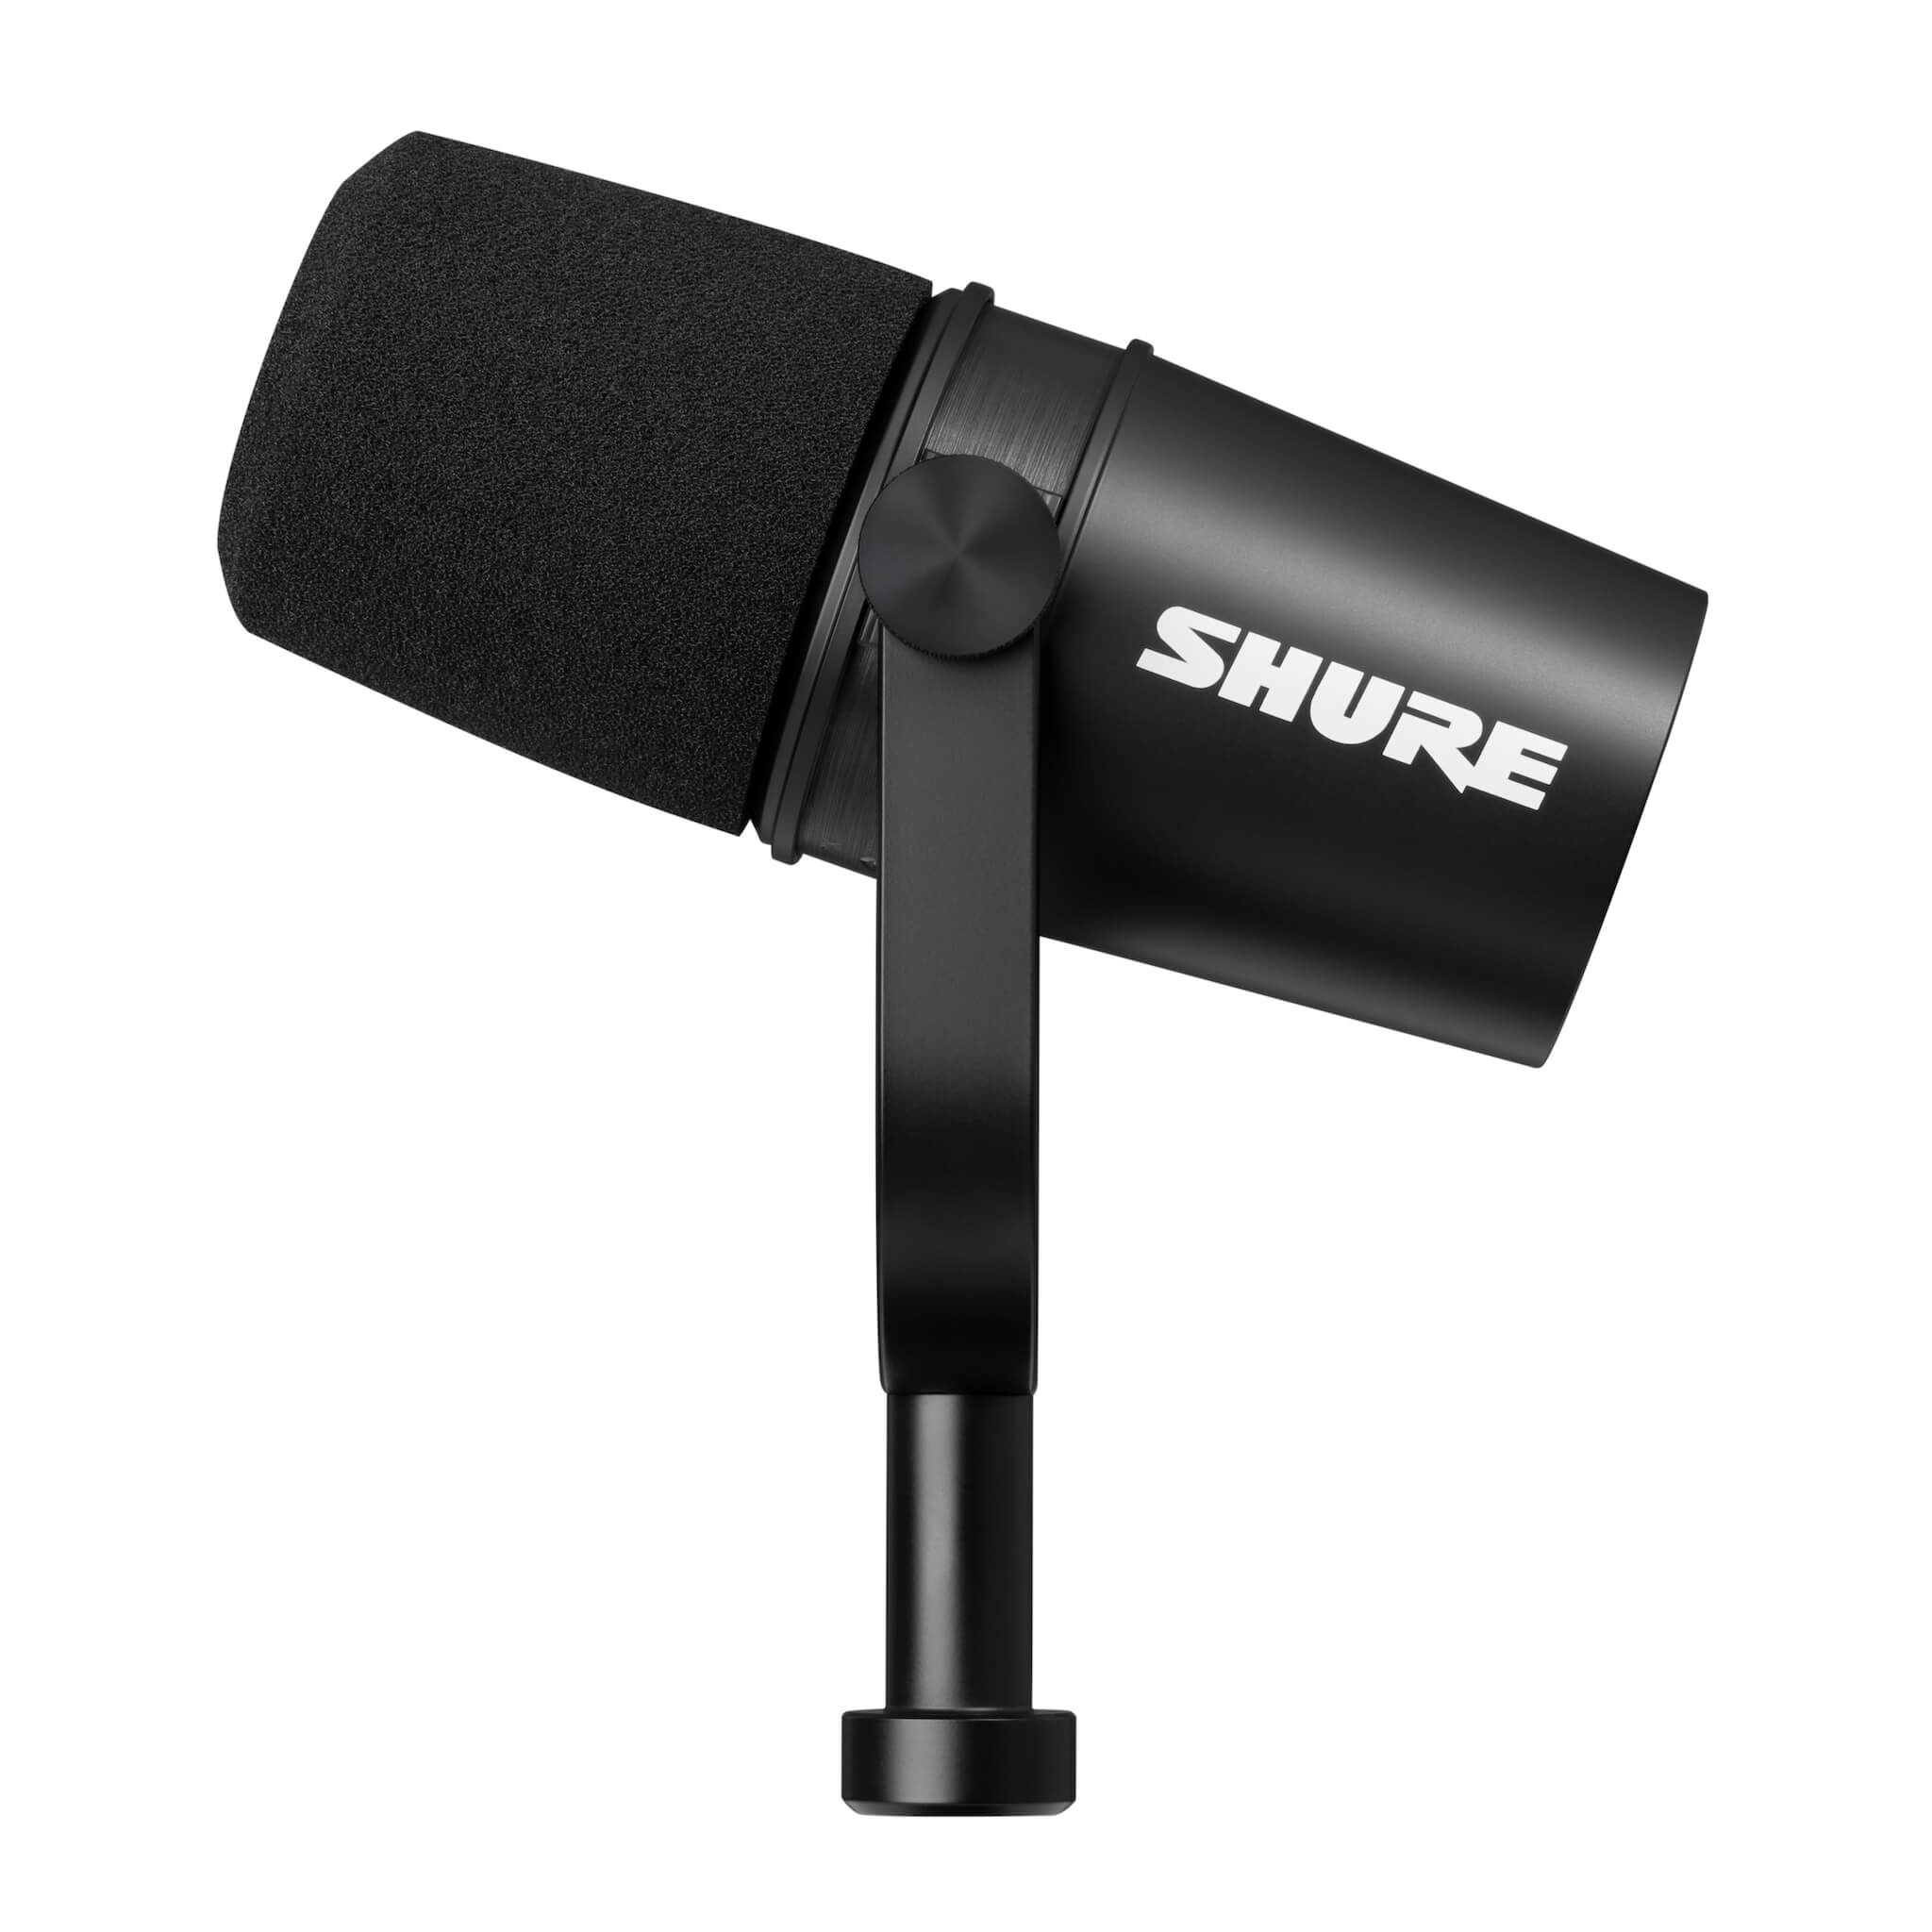 Shure MV7X - Podcast Microphone with XLR Output, left side standing upright